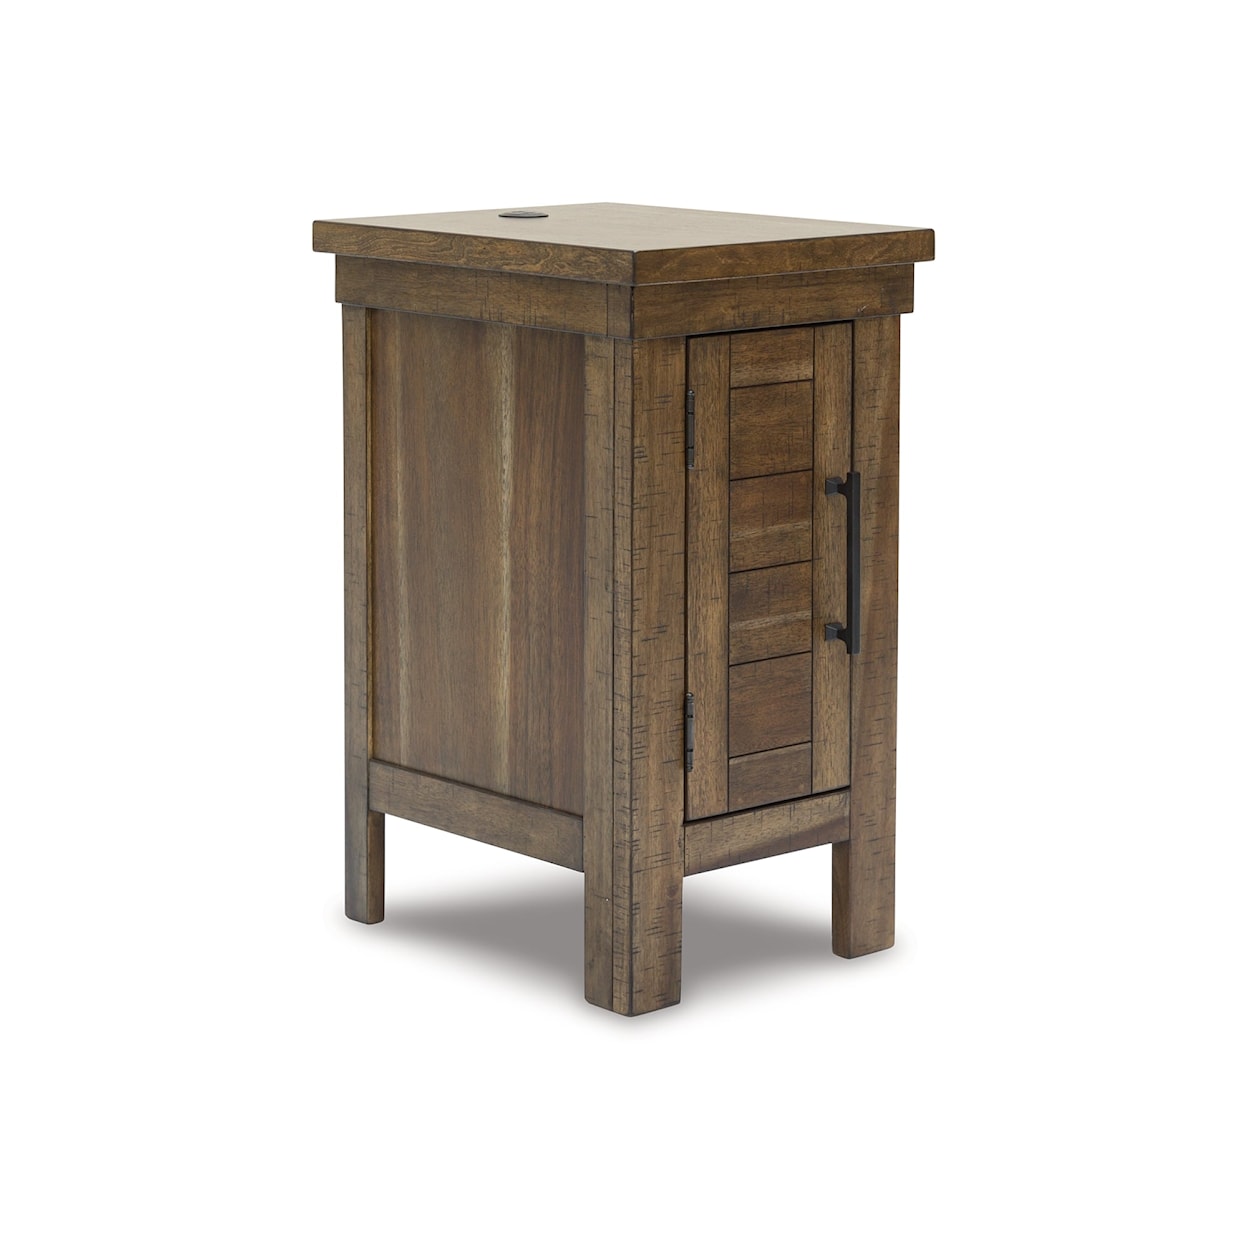 Benchcraft Moriville Chairside End Table